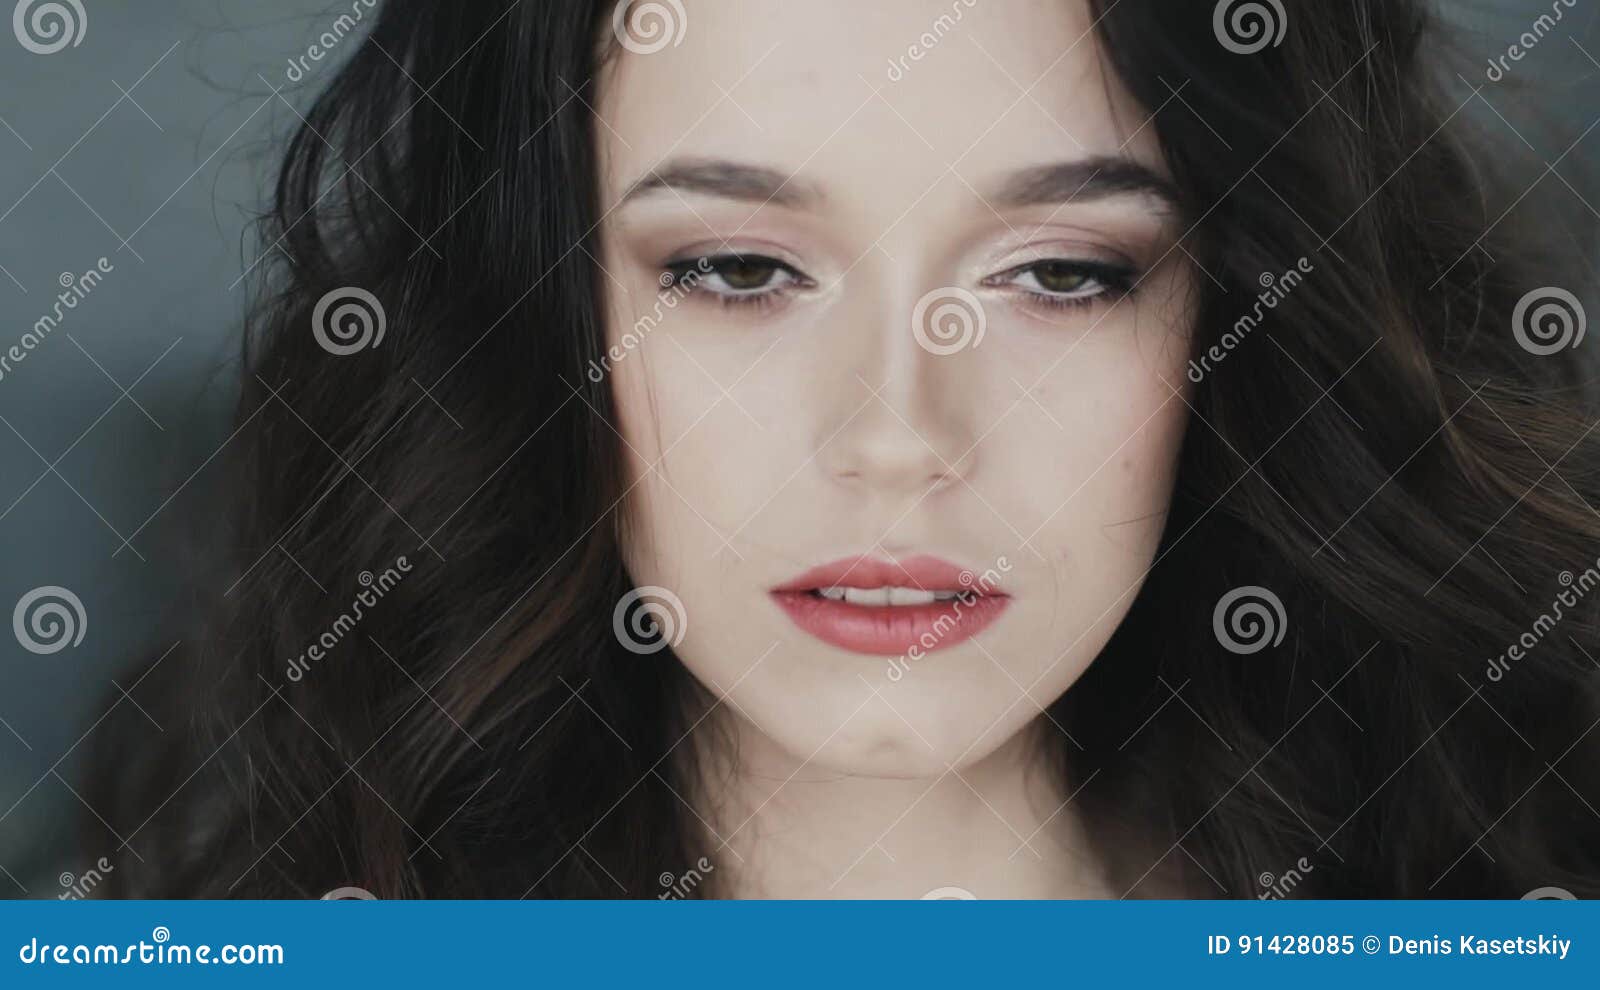 Cute Girl Gently Looks Into The Camera Camera Portrait Of A Young